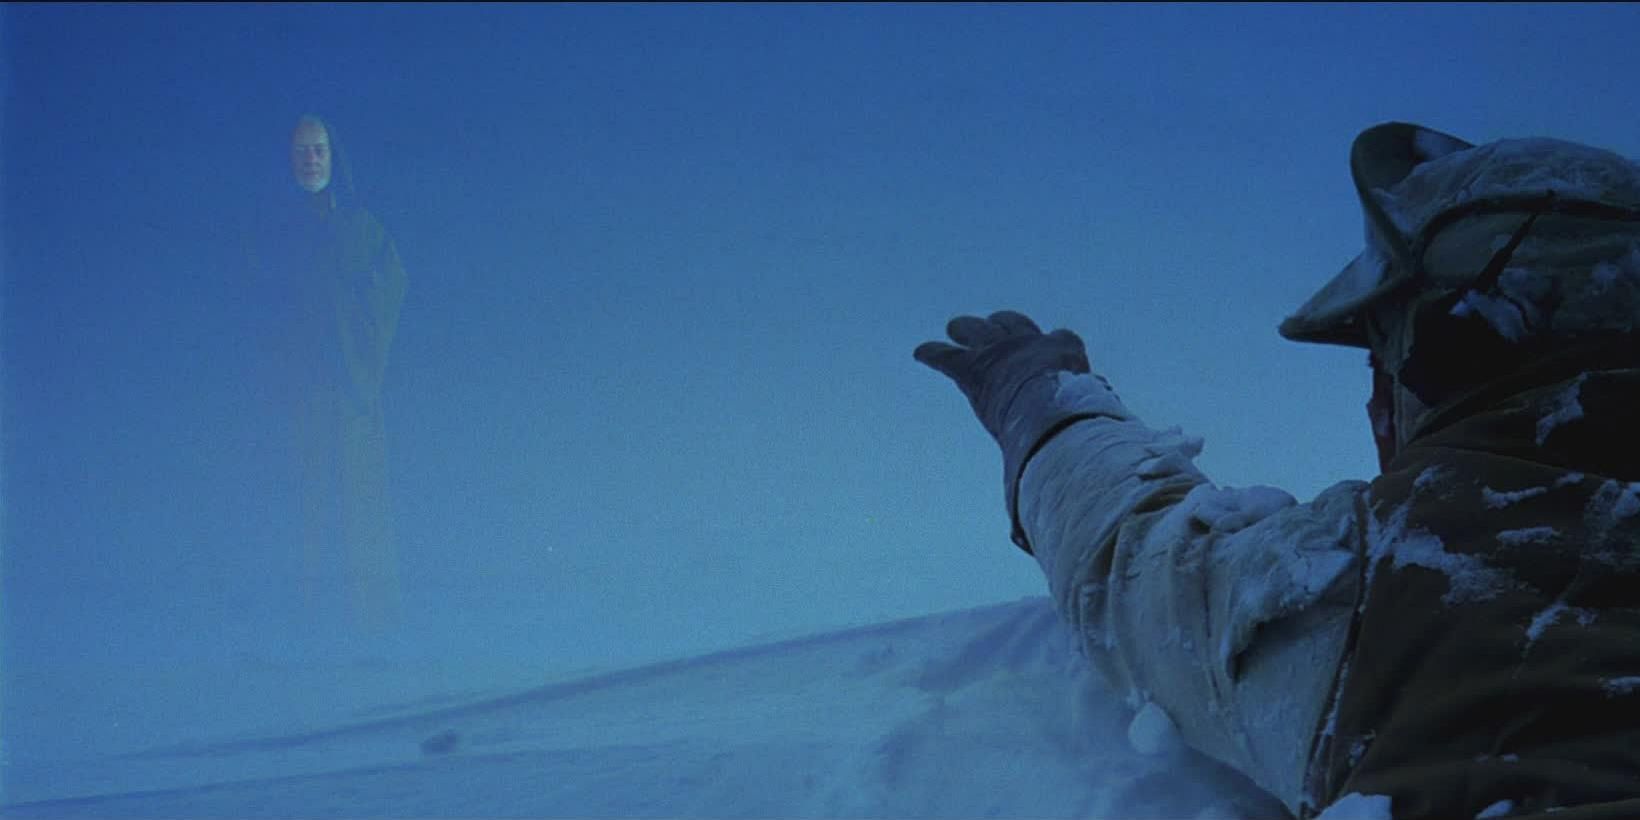 Obi-Wan's Force ghost in The Empire Strikes Back